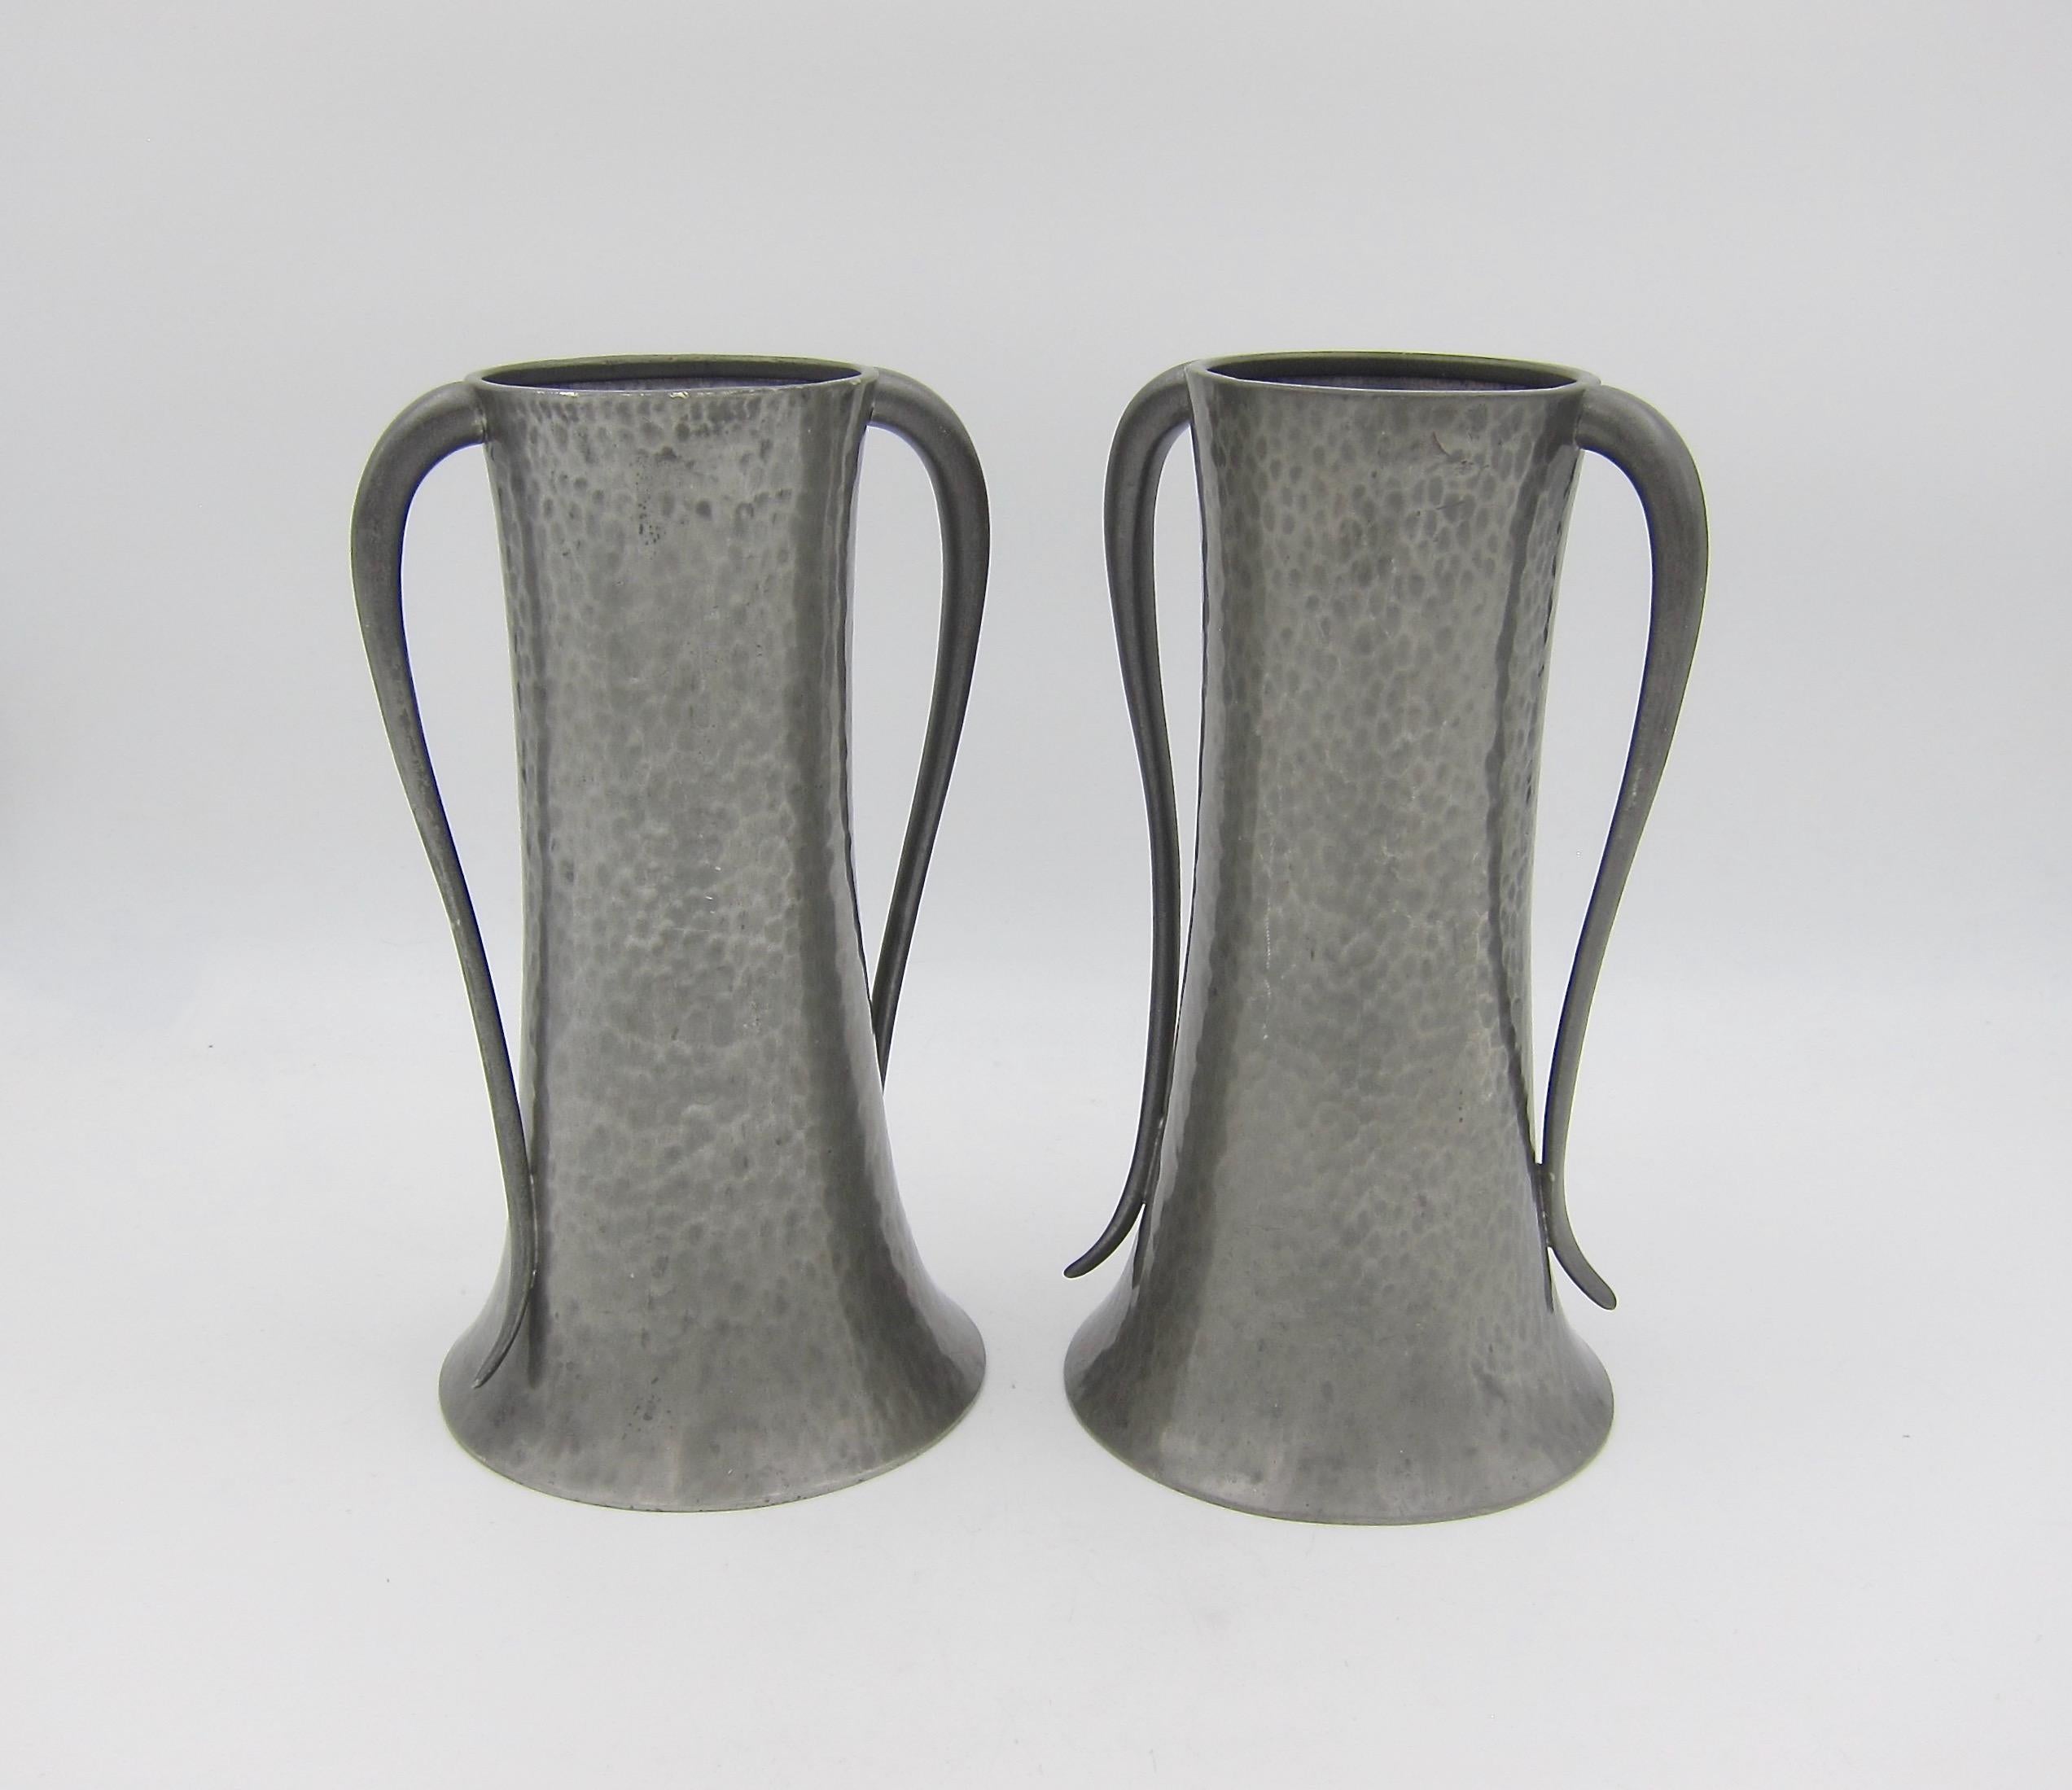 A handsome pair of English hand-hammered vases from Walker & Co. of Sheffield in hand beaten pewter. The corseted bodies have planishing (hammer) marks overall and elegant, Art Nouveau curved double handles.

Good condition with some